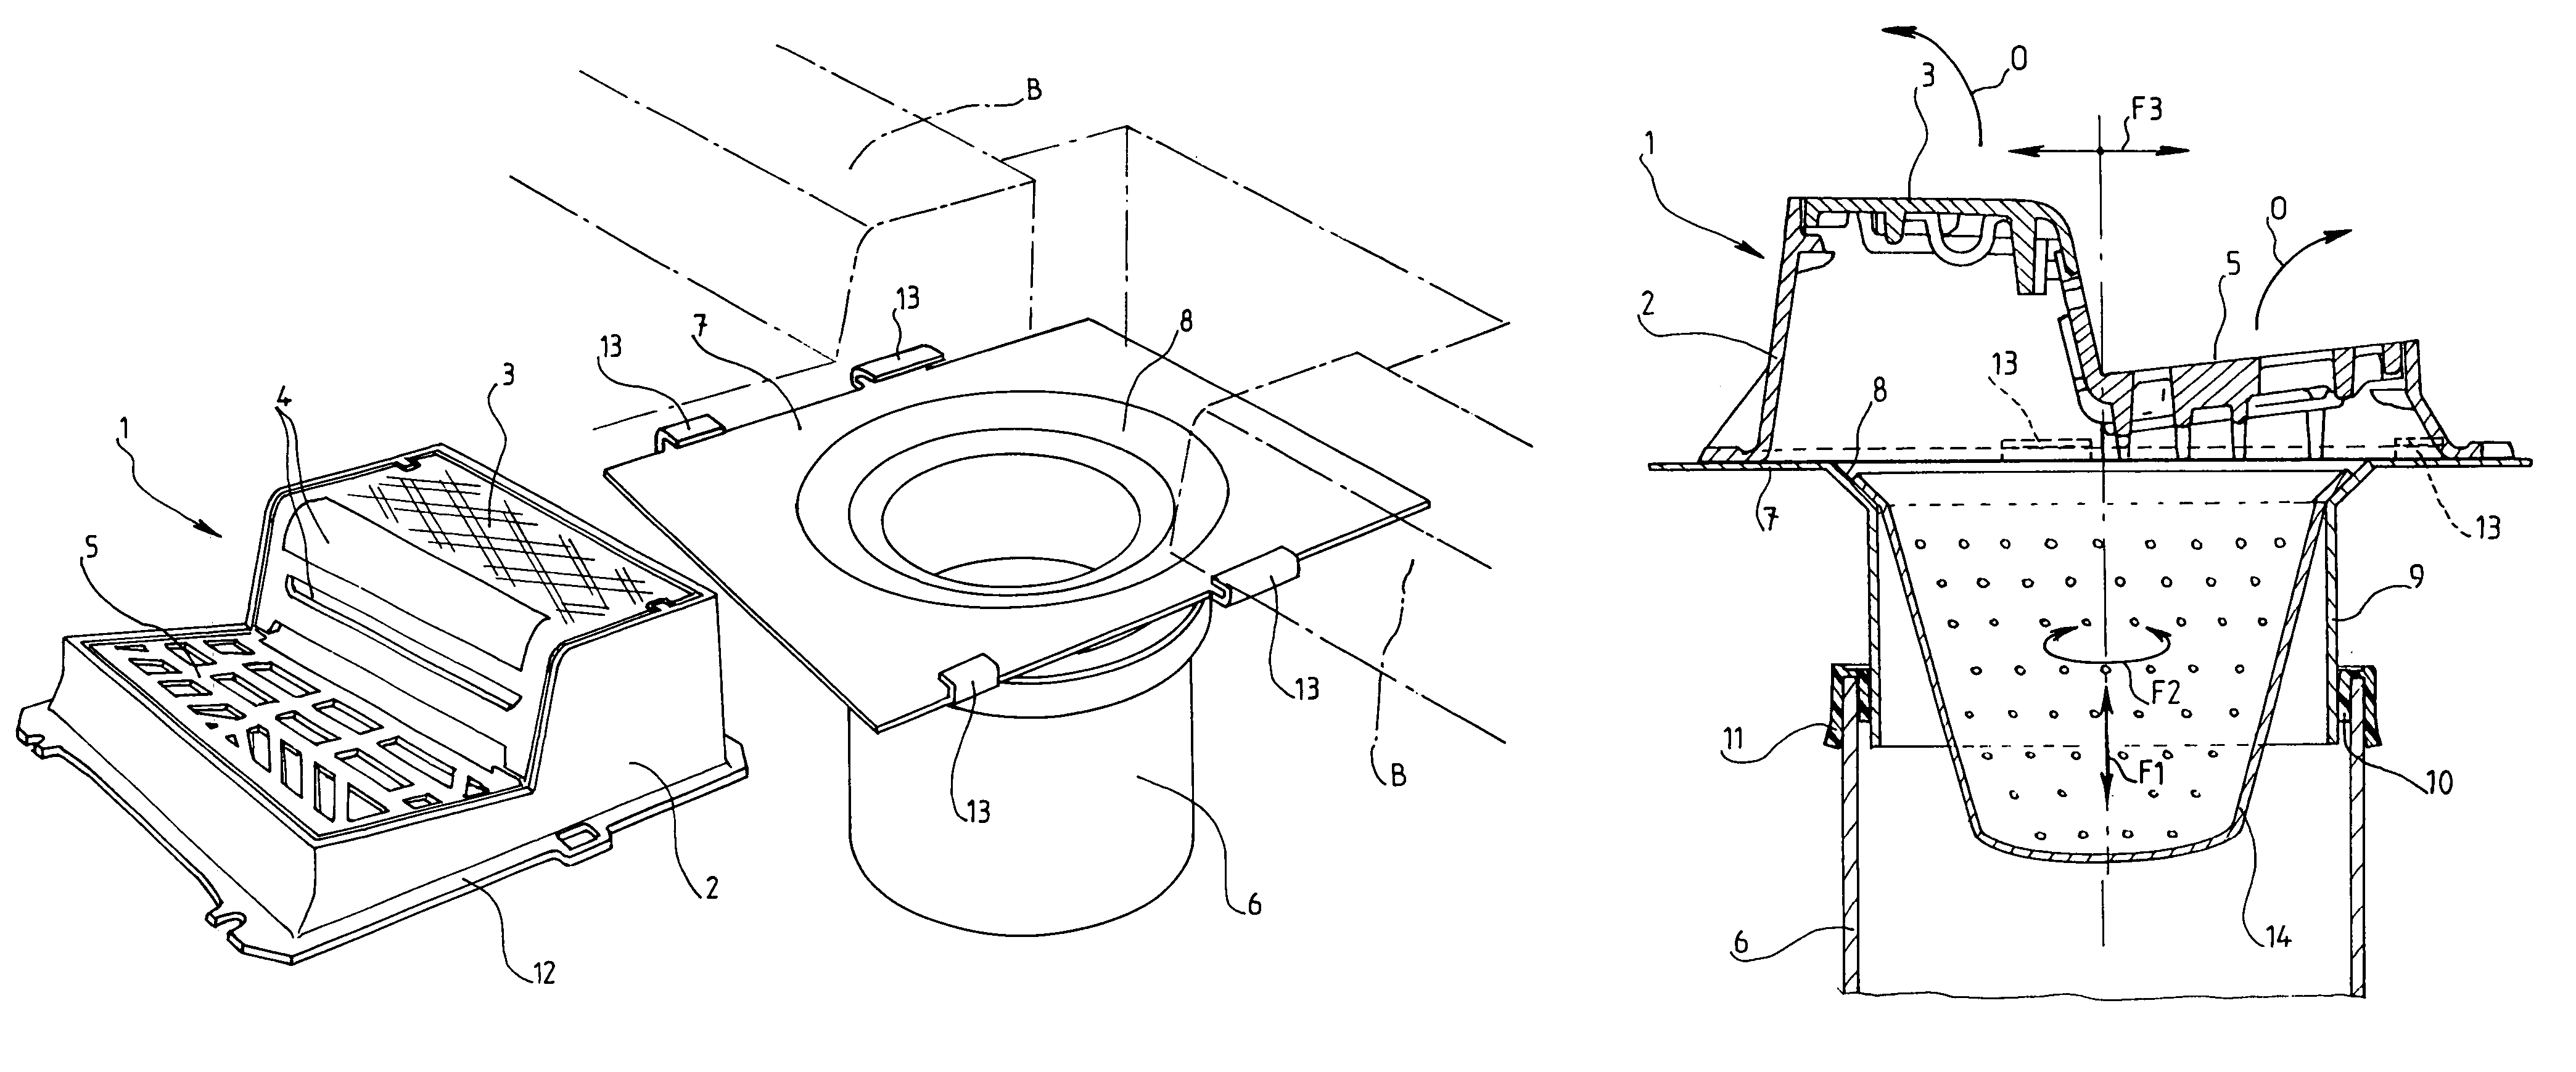 Device for connecting a piece of road equipment, such as drain inlet, to a vertical fixed runoff drainage pipe